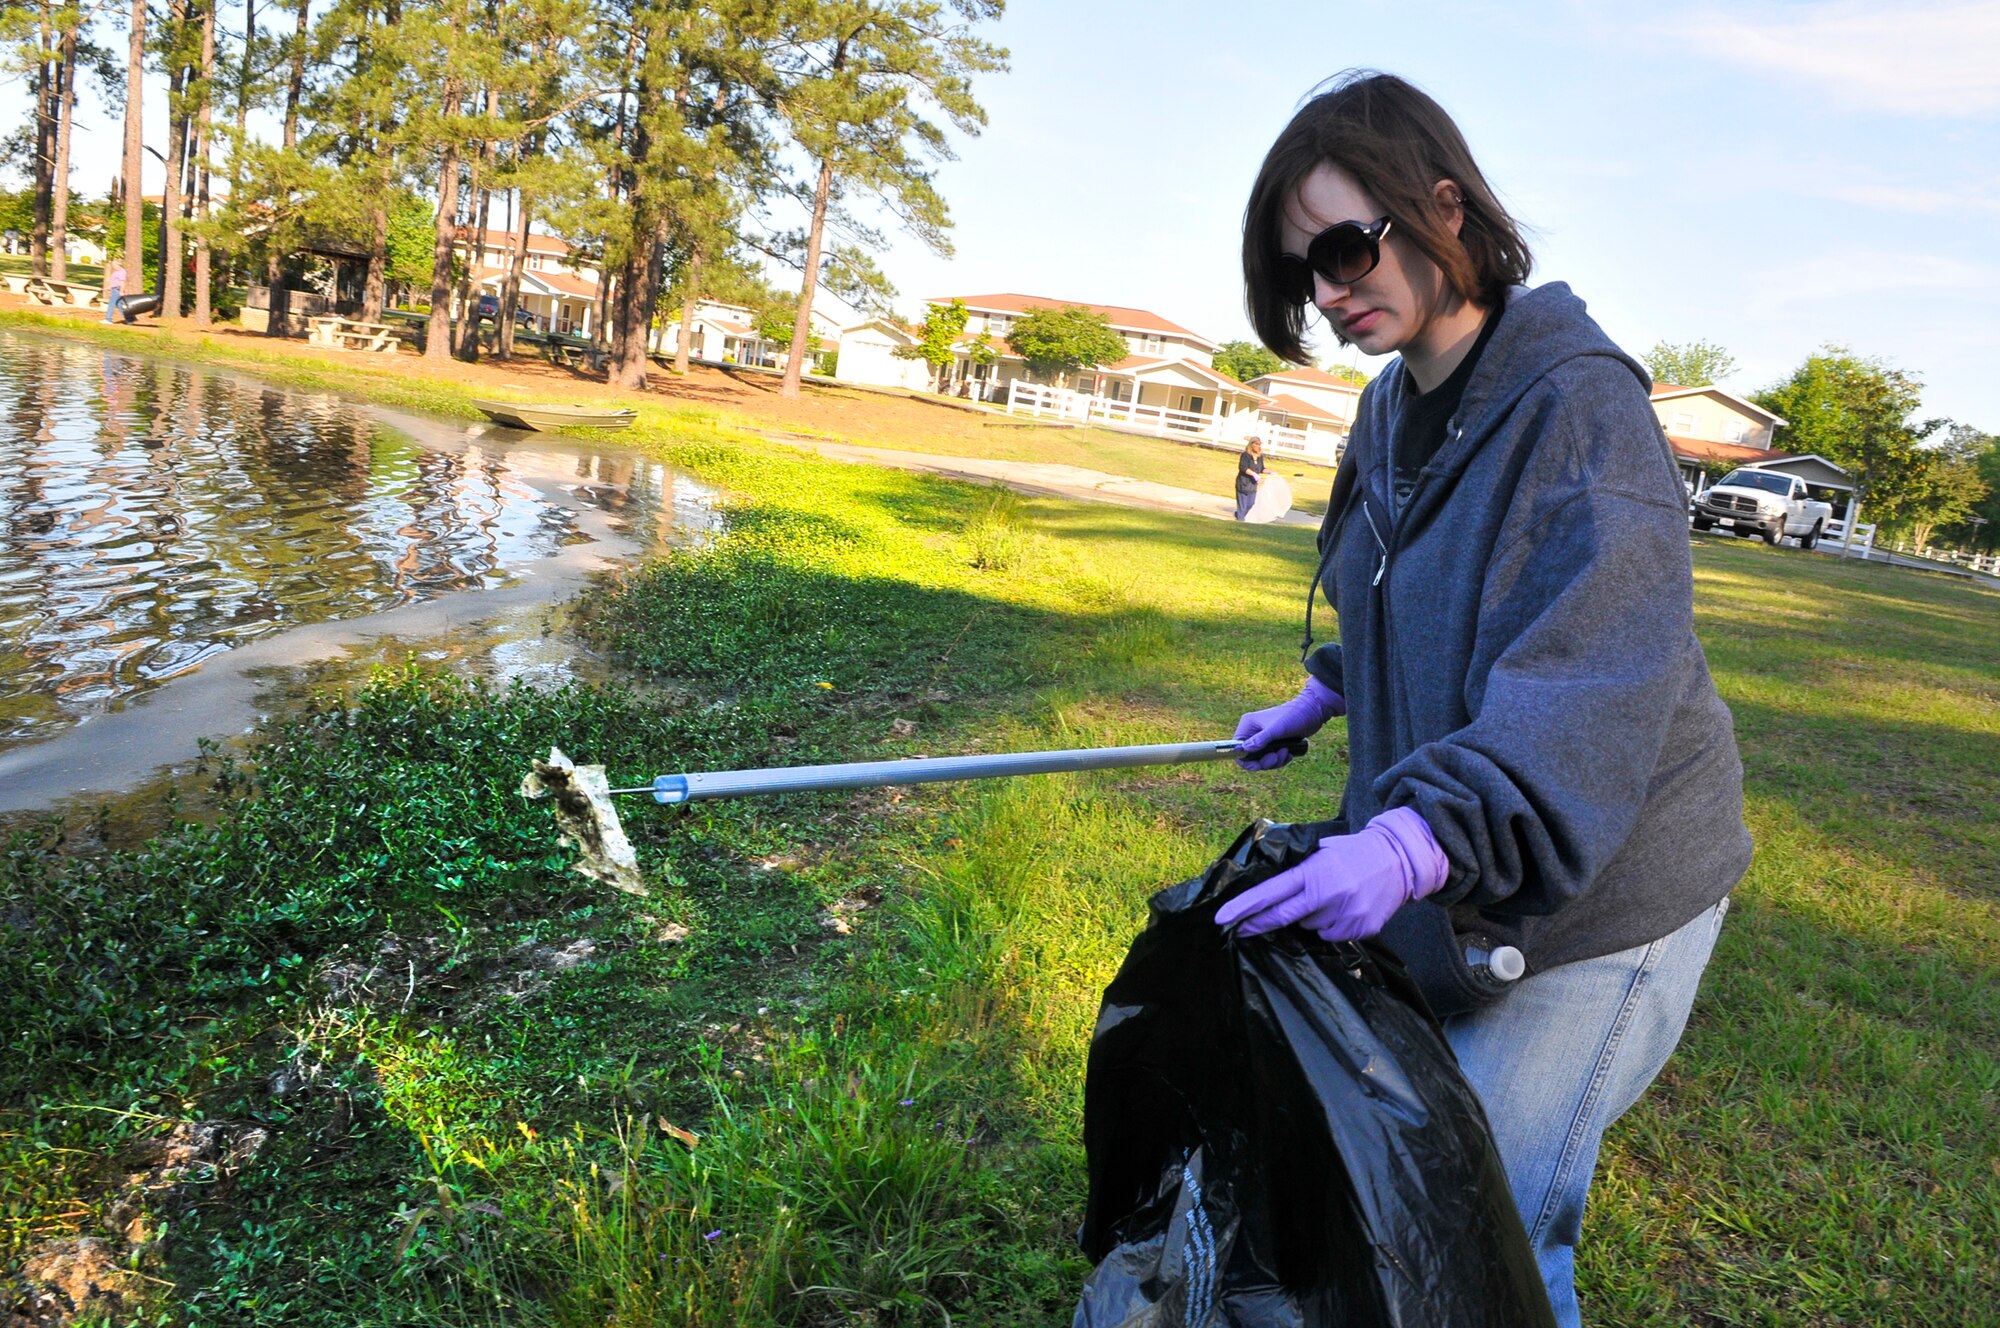 Laurel Cordell, 78th Civil Engineer Group, picks up trash and debris around Scout Lake Wednesday. The clean-up was part of the Robins Air Force Base Earth Day Celebration events. (U. S. Air Force photo by Sue Sapp)